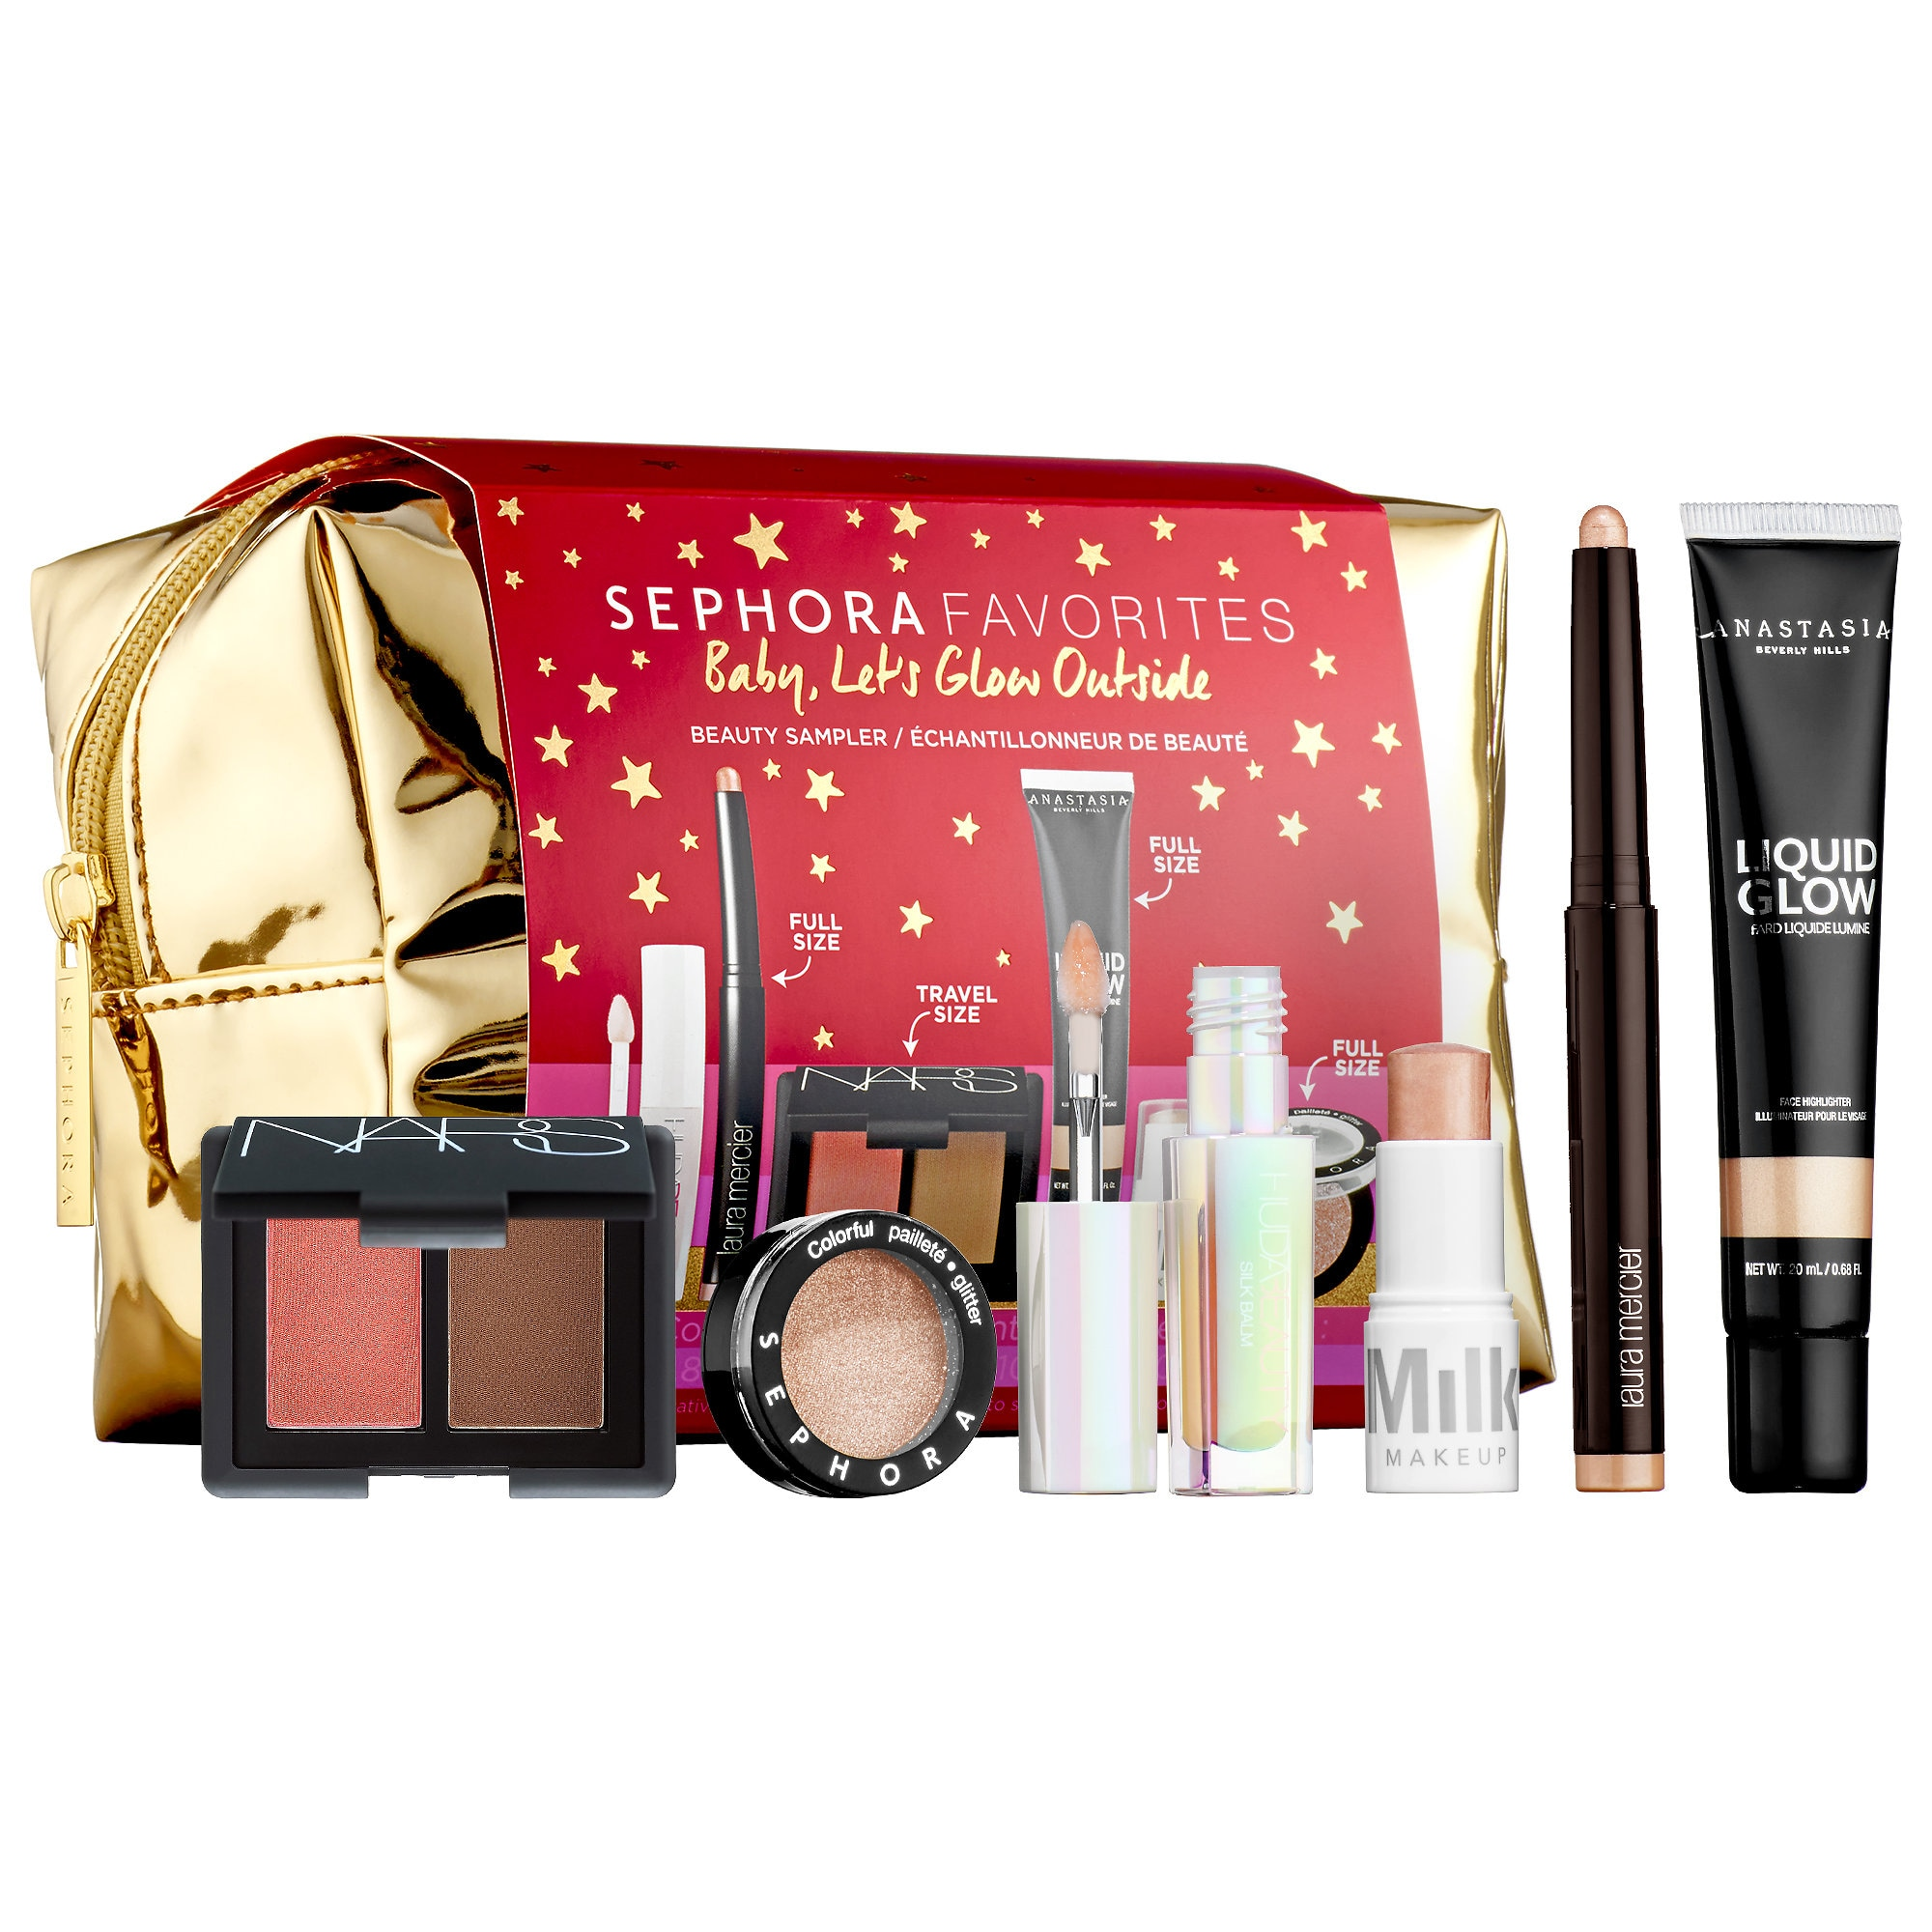 Four New Sephora Kits Available Now + Coupons! hello subscription